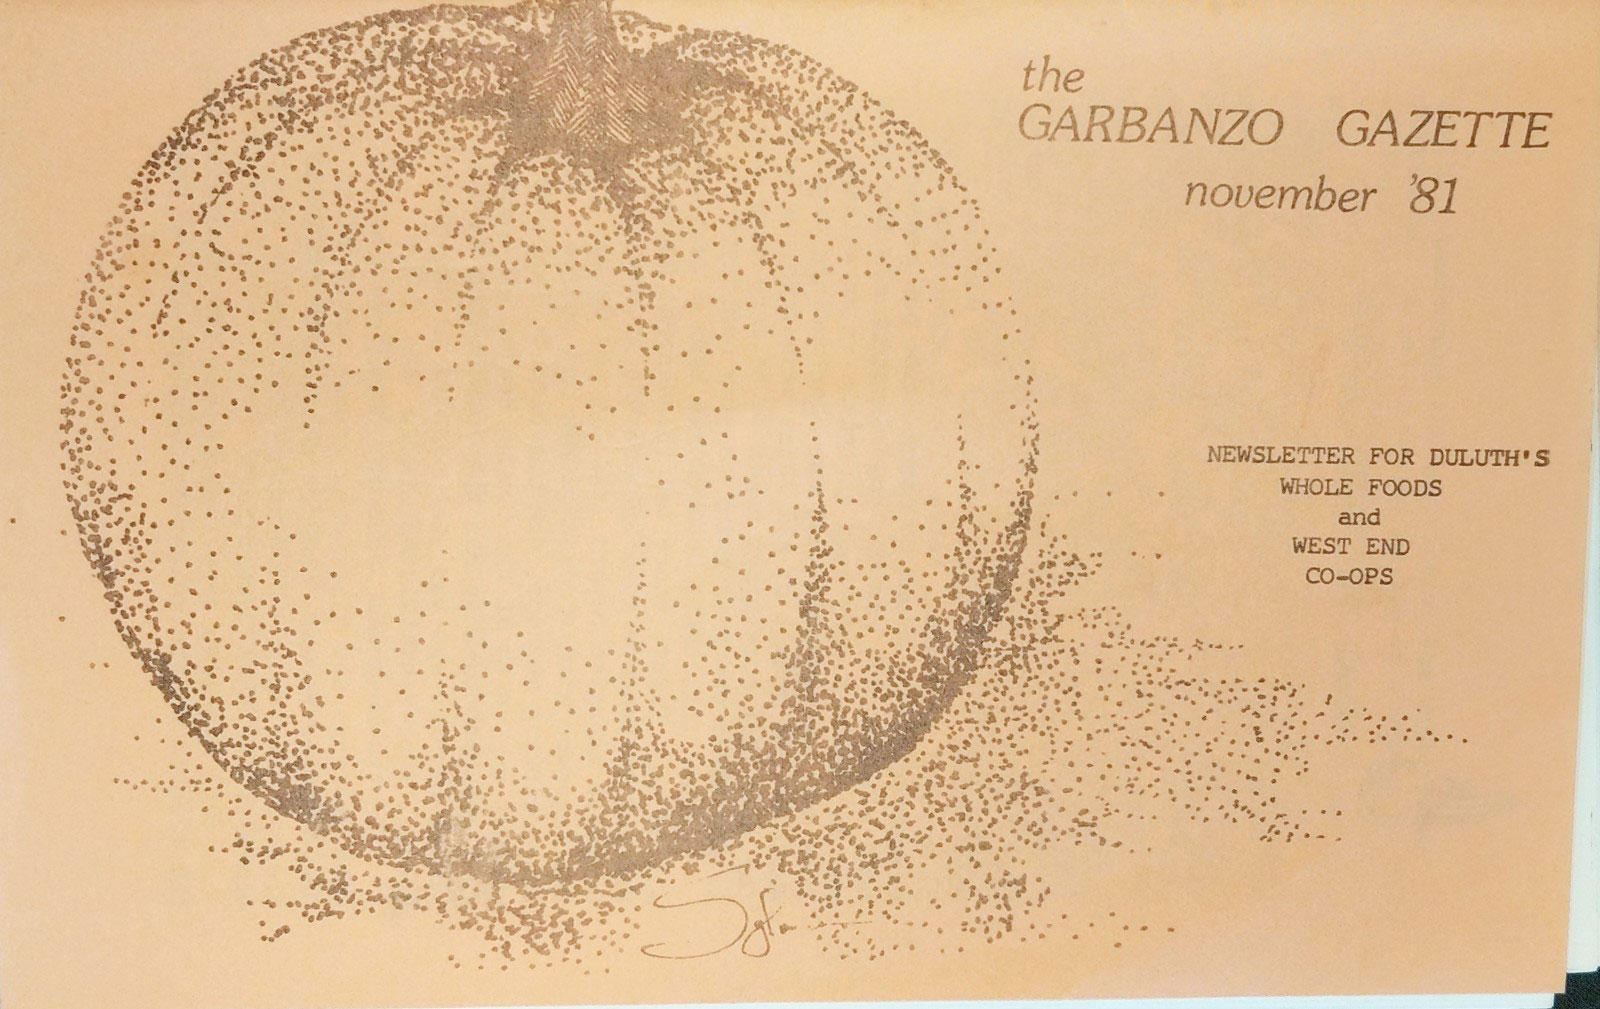 Newsletter titled "the GARBANZO GAZETTE november '81" with a dotted illustration of a large tomato on the left. Text on the right reads "NEWSLETTER FOR DULUTH'S WHOLE FOODS COOP and WEST END CO-OPS.